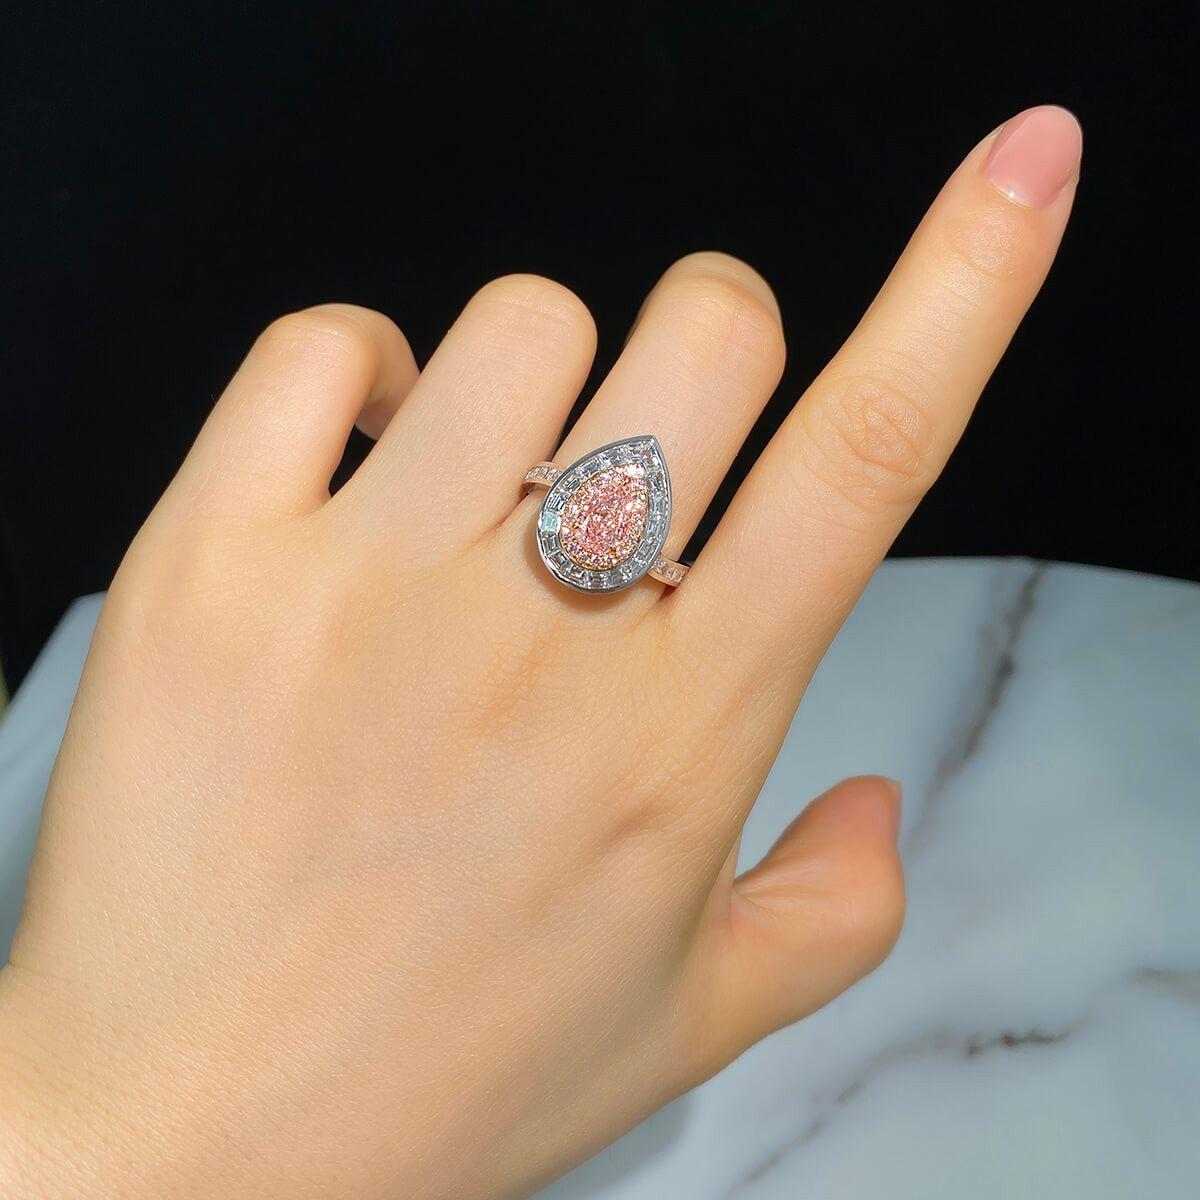 Contemporary 2.31 Carat Fancy Pink Diamond Ring 18 Karat White Gold GIA Certified For Sale